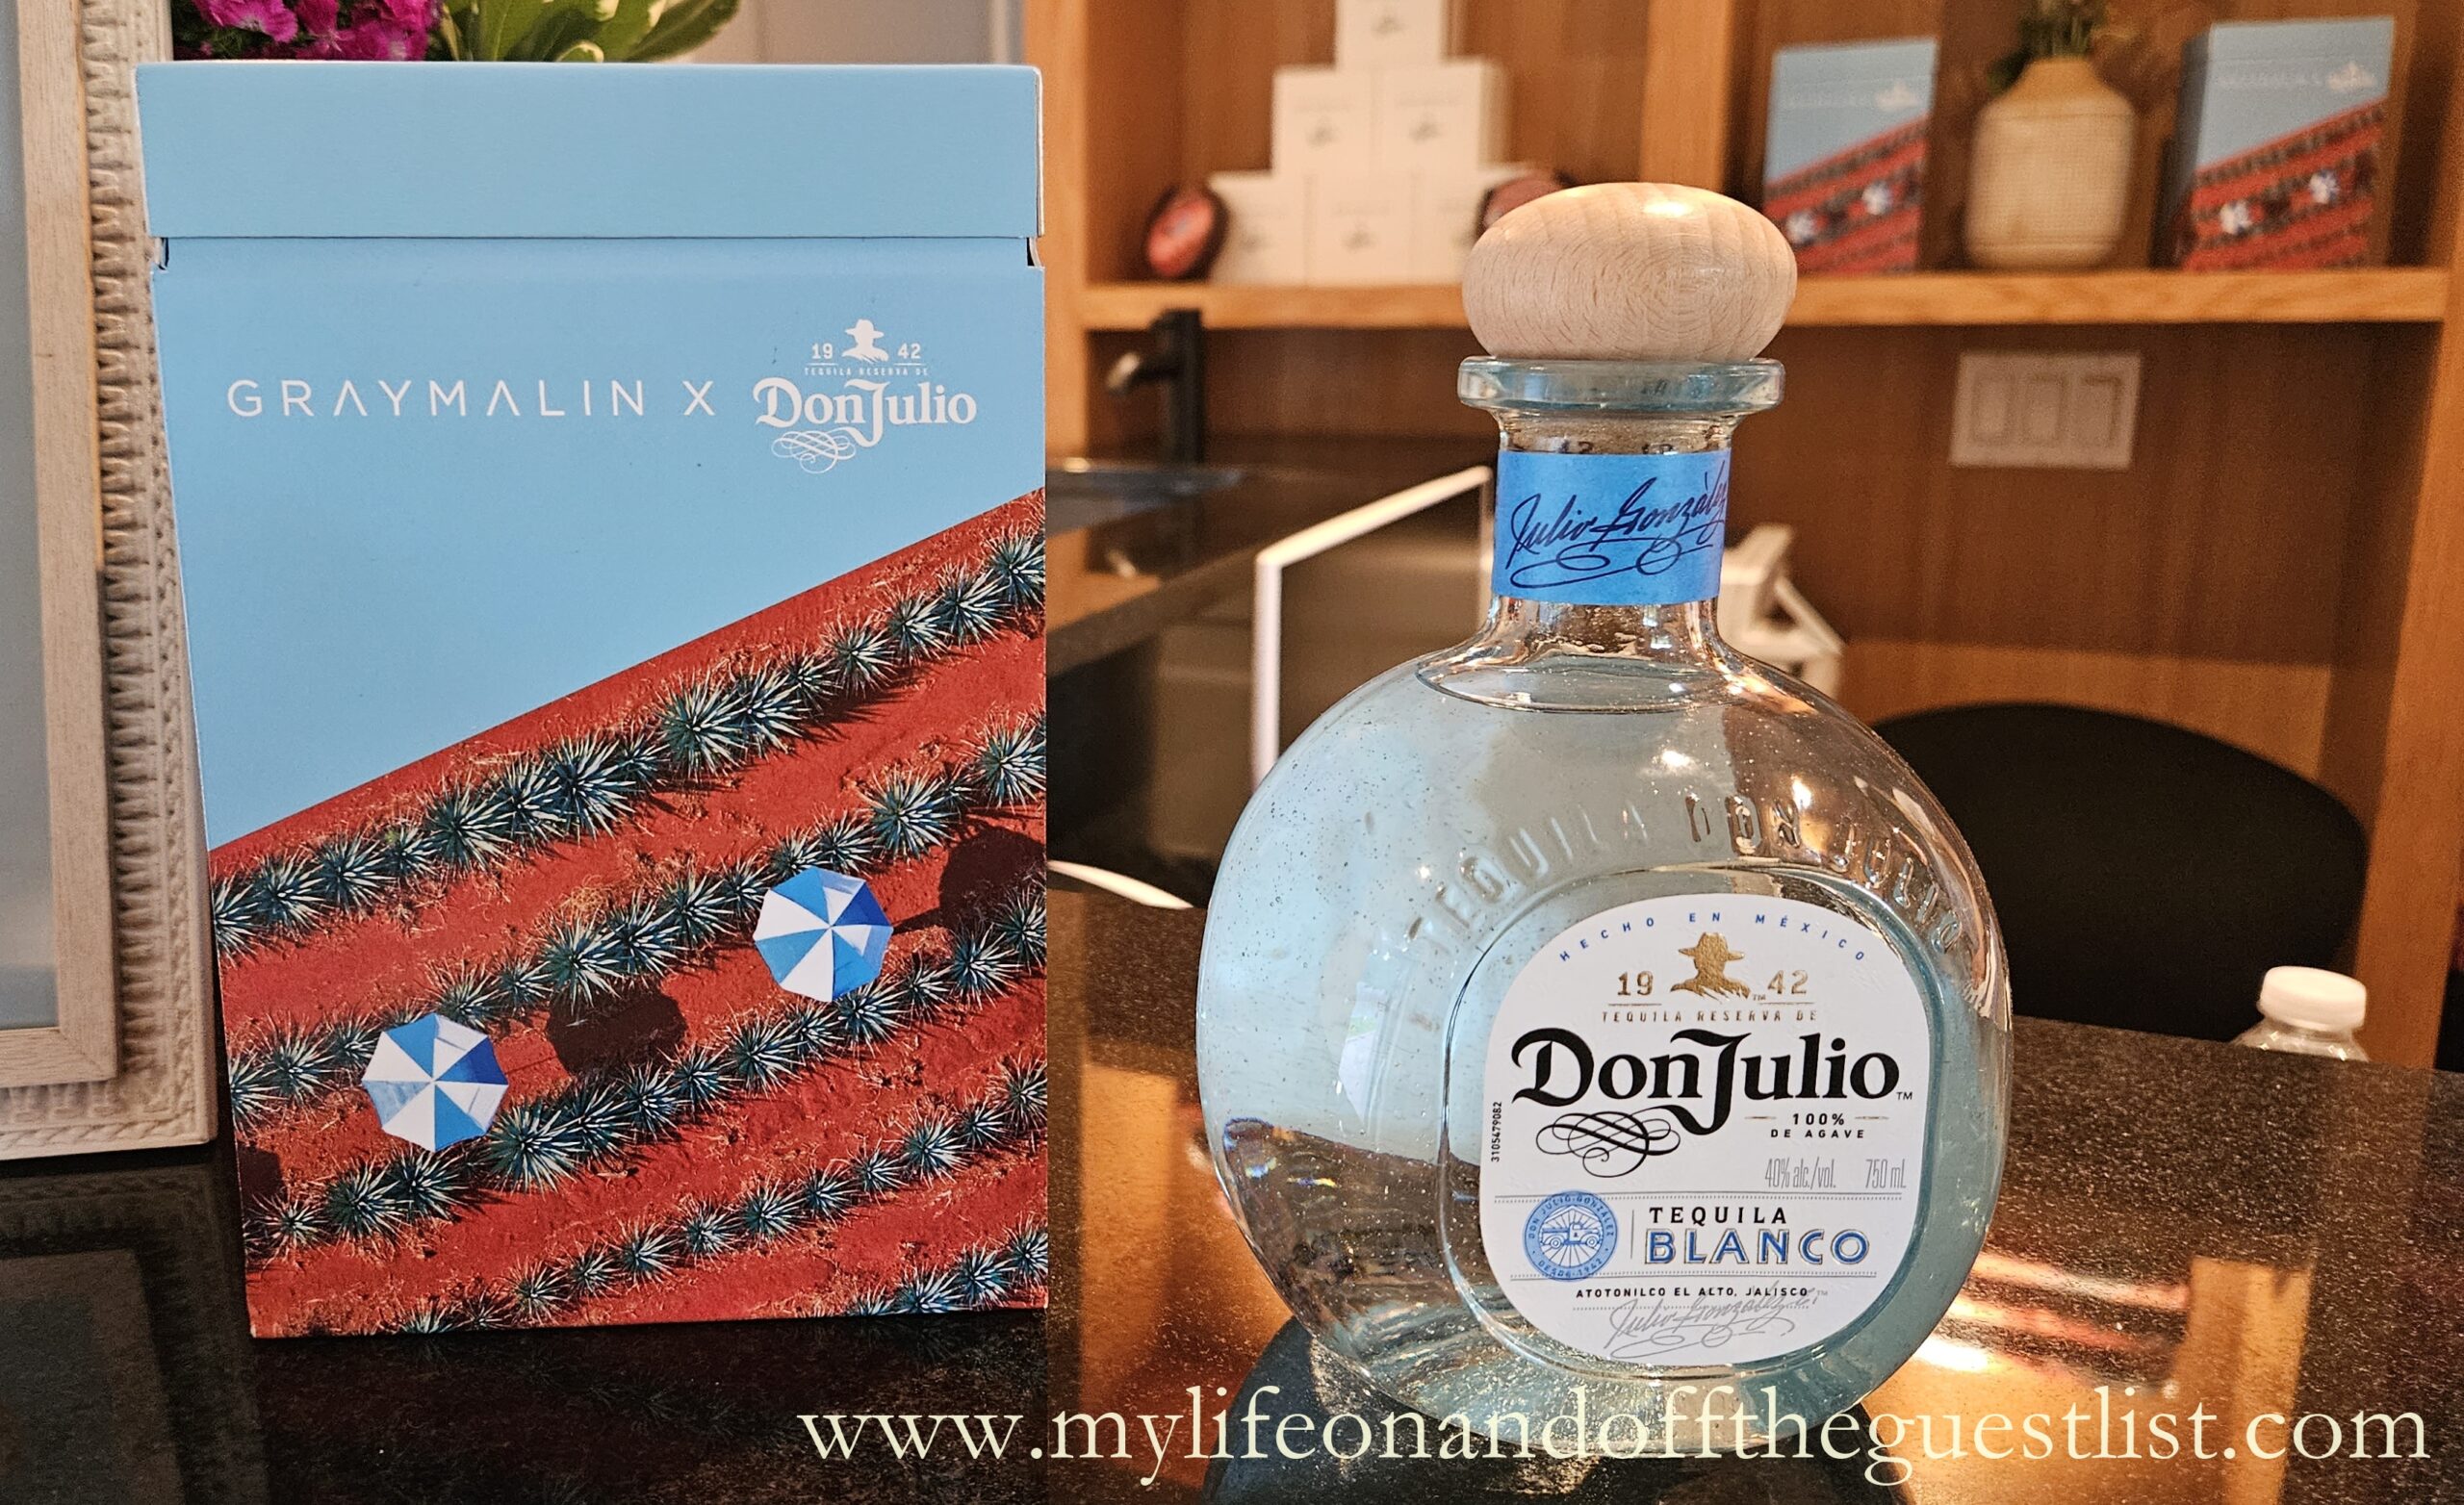 Tequila Don Julio x Gray Malin's ‘Agave Series’ Aerial Photography